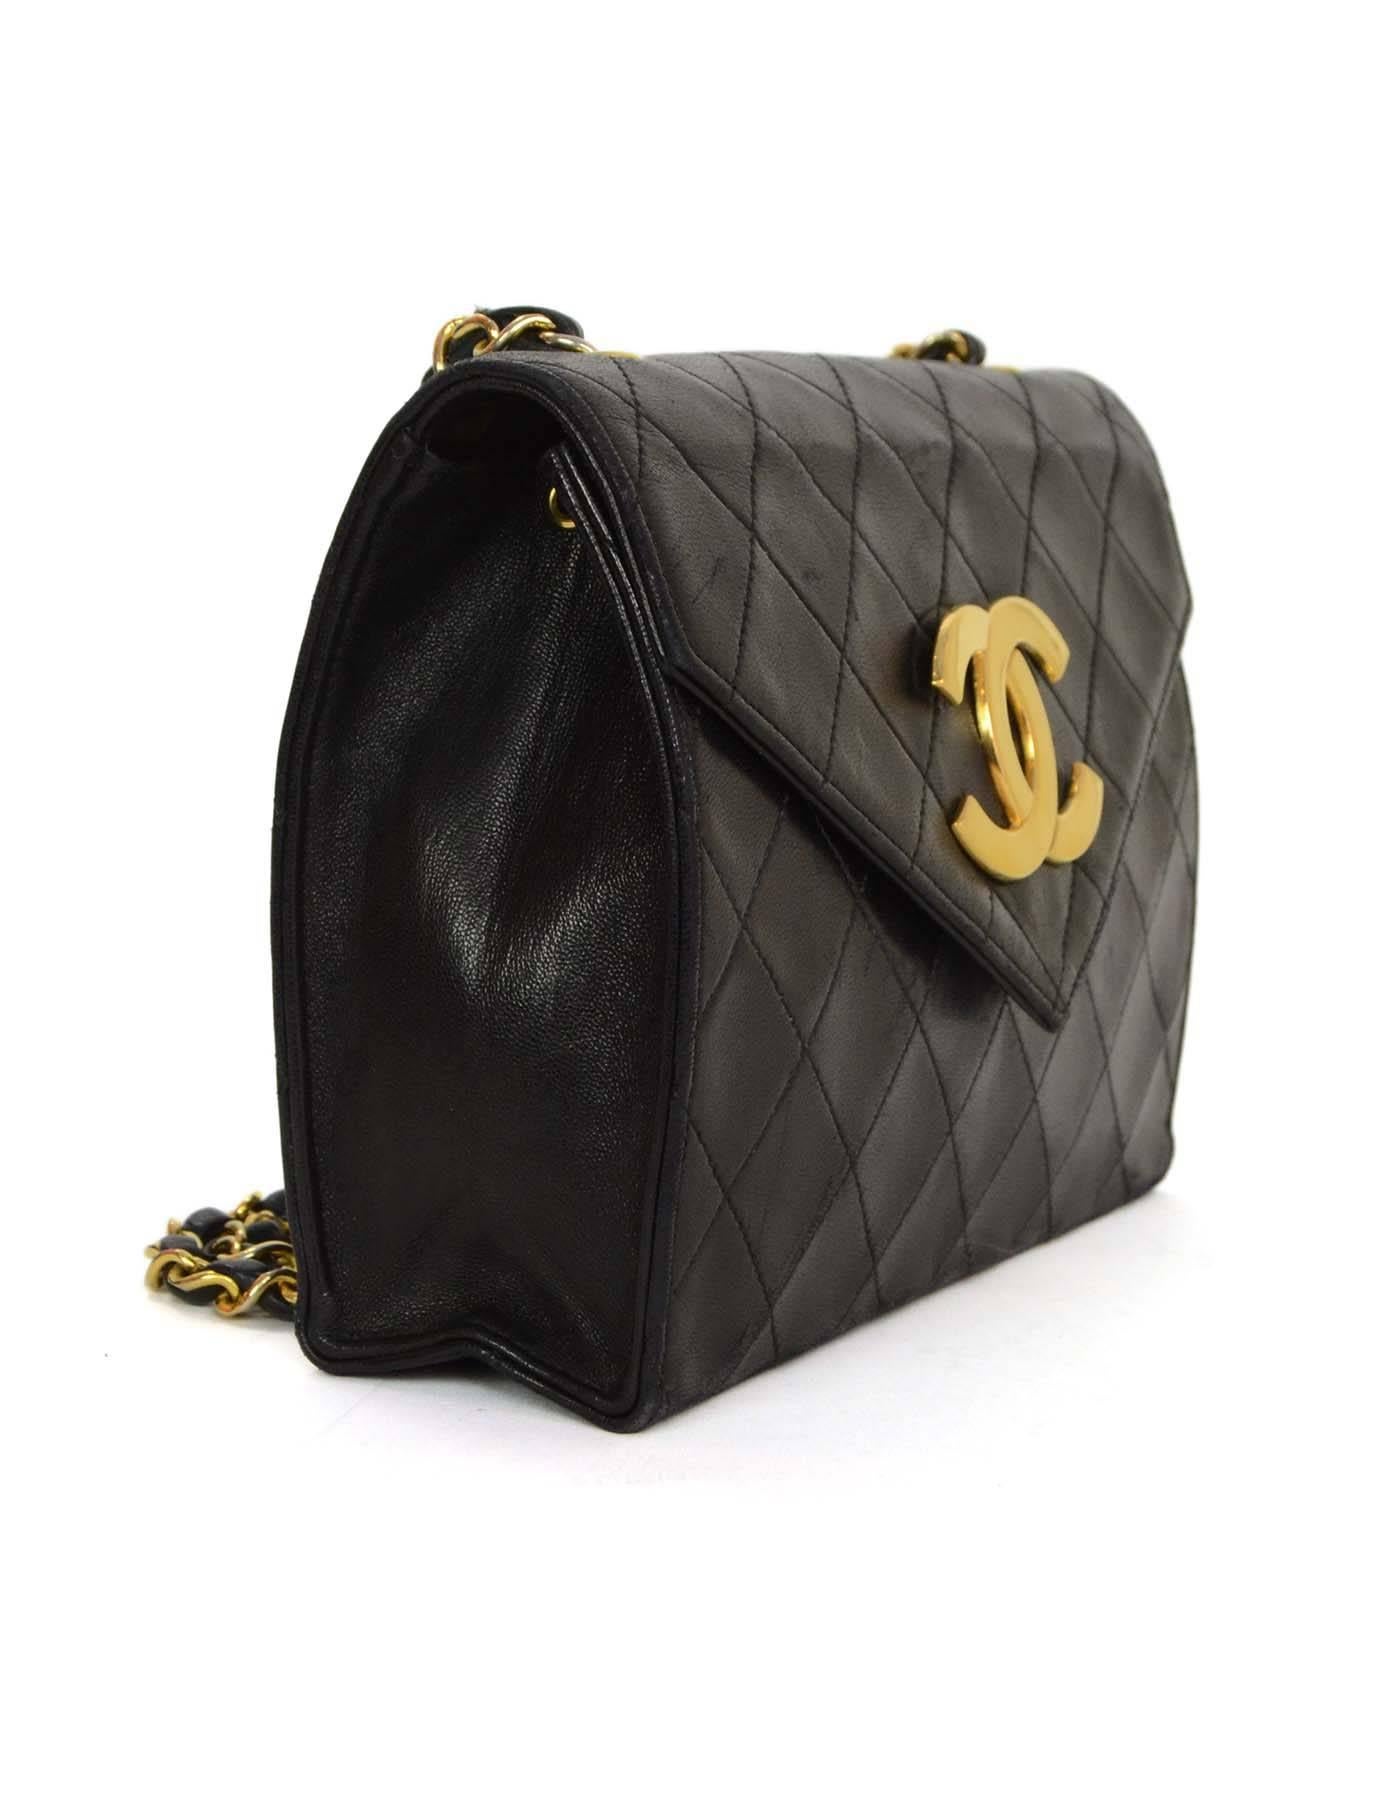 Chanel Black Quilted CC Flap Bag 
Features envelope flap with CC logo hardware detail

Year of Production: 1988
Color: Black
Hardware: Goldtone
Materials: Leather and metal
Lining: Burgundy leather
Closure/Opening: Snap closure
Exterior